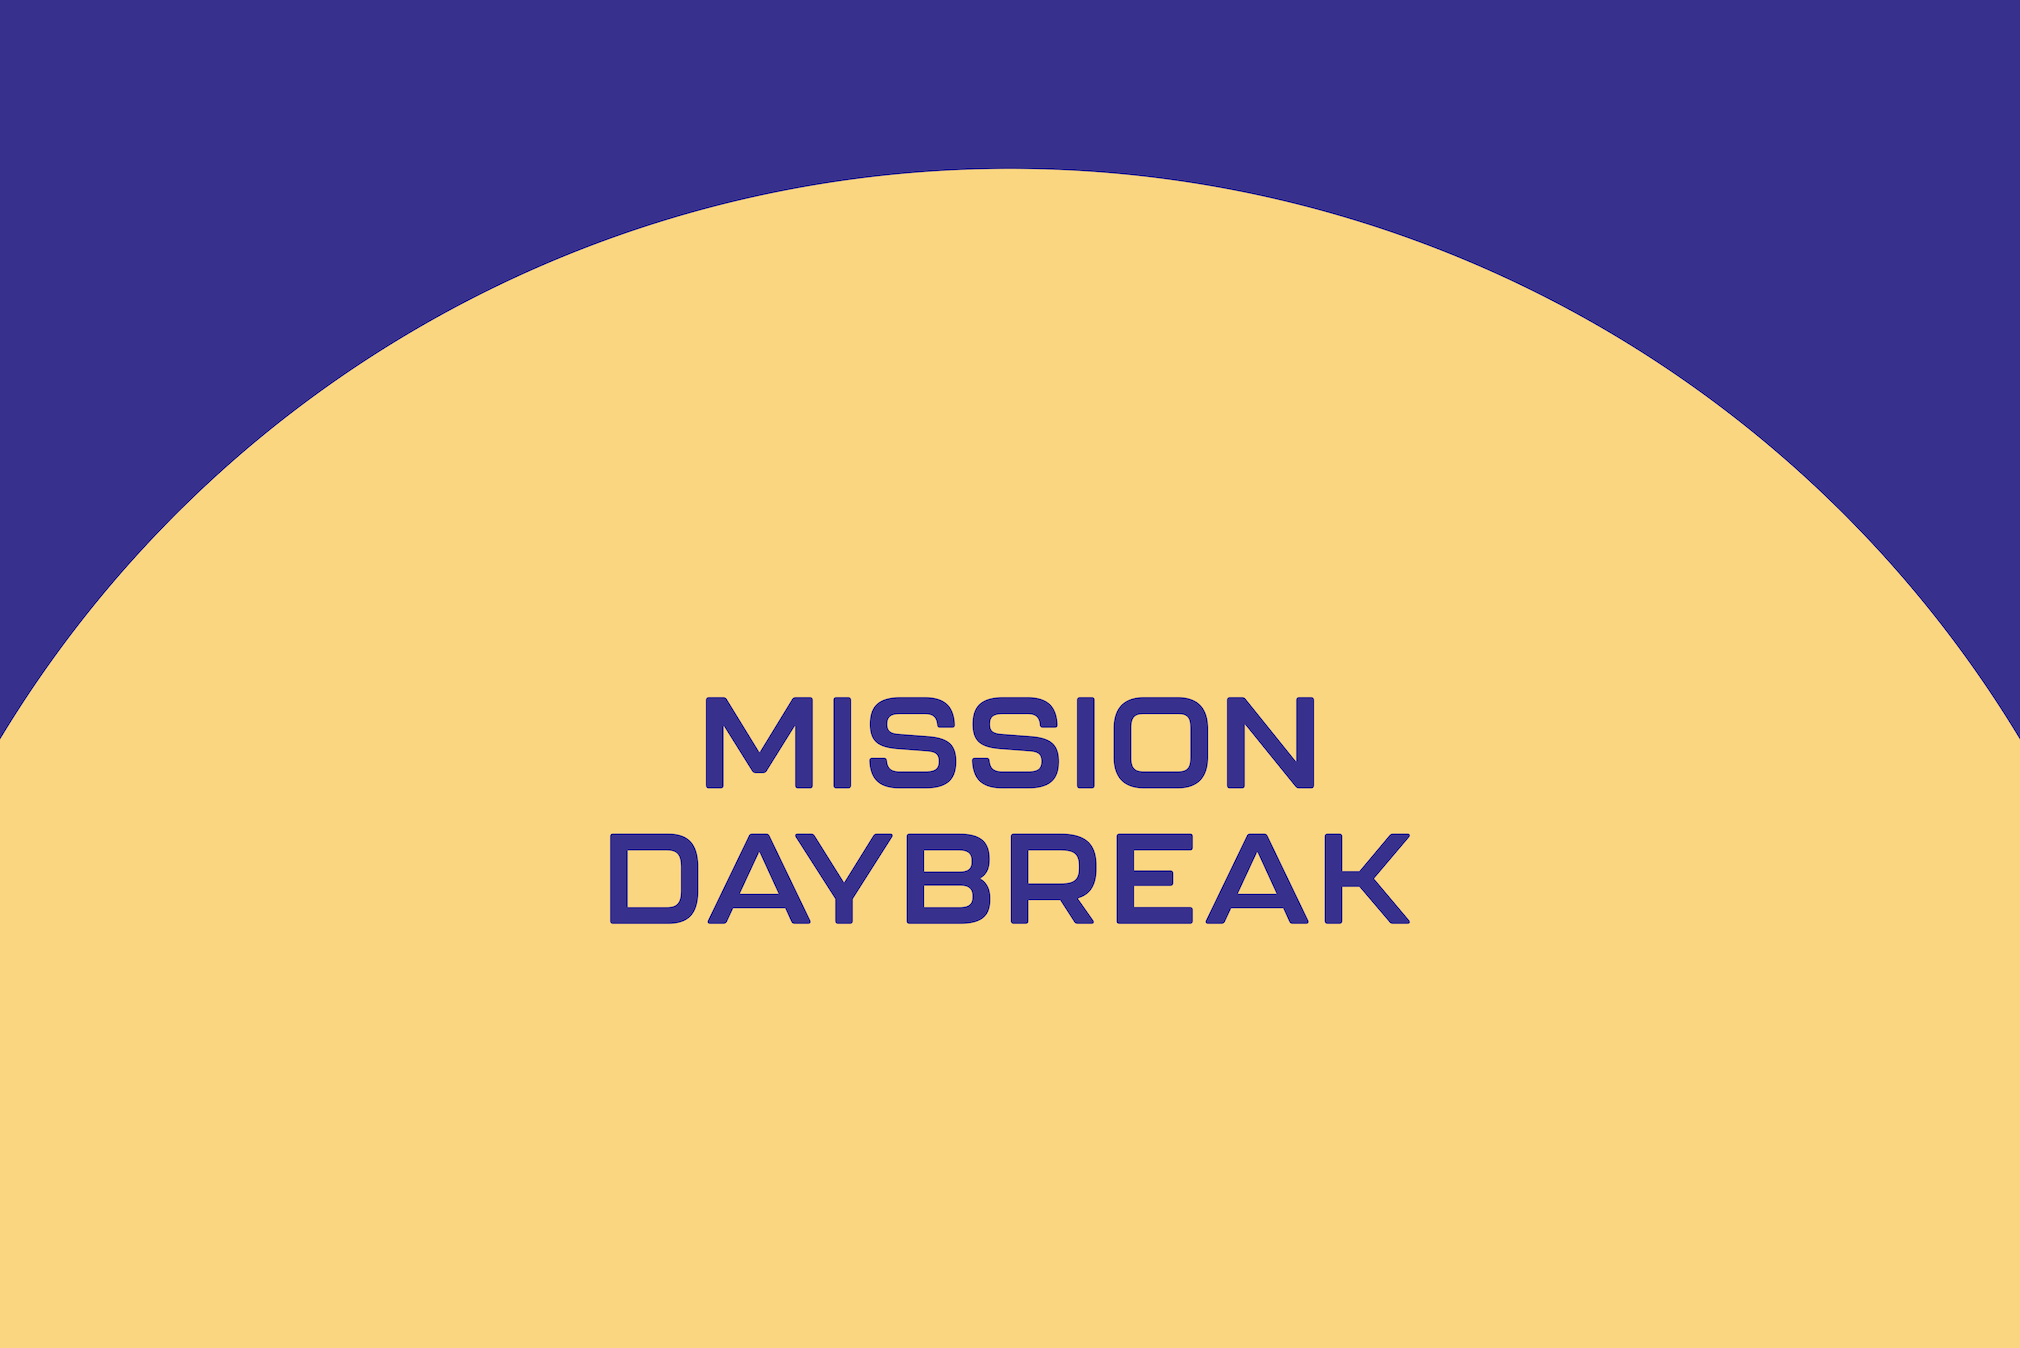 Mission Daybreak offers an opportunity to serve those who have served